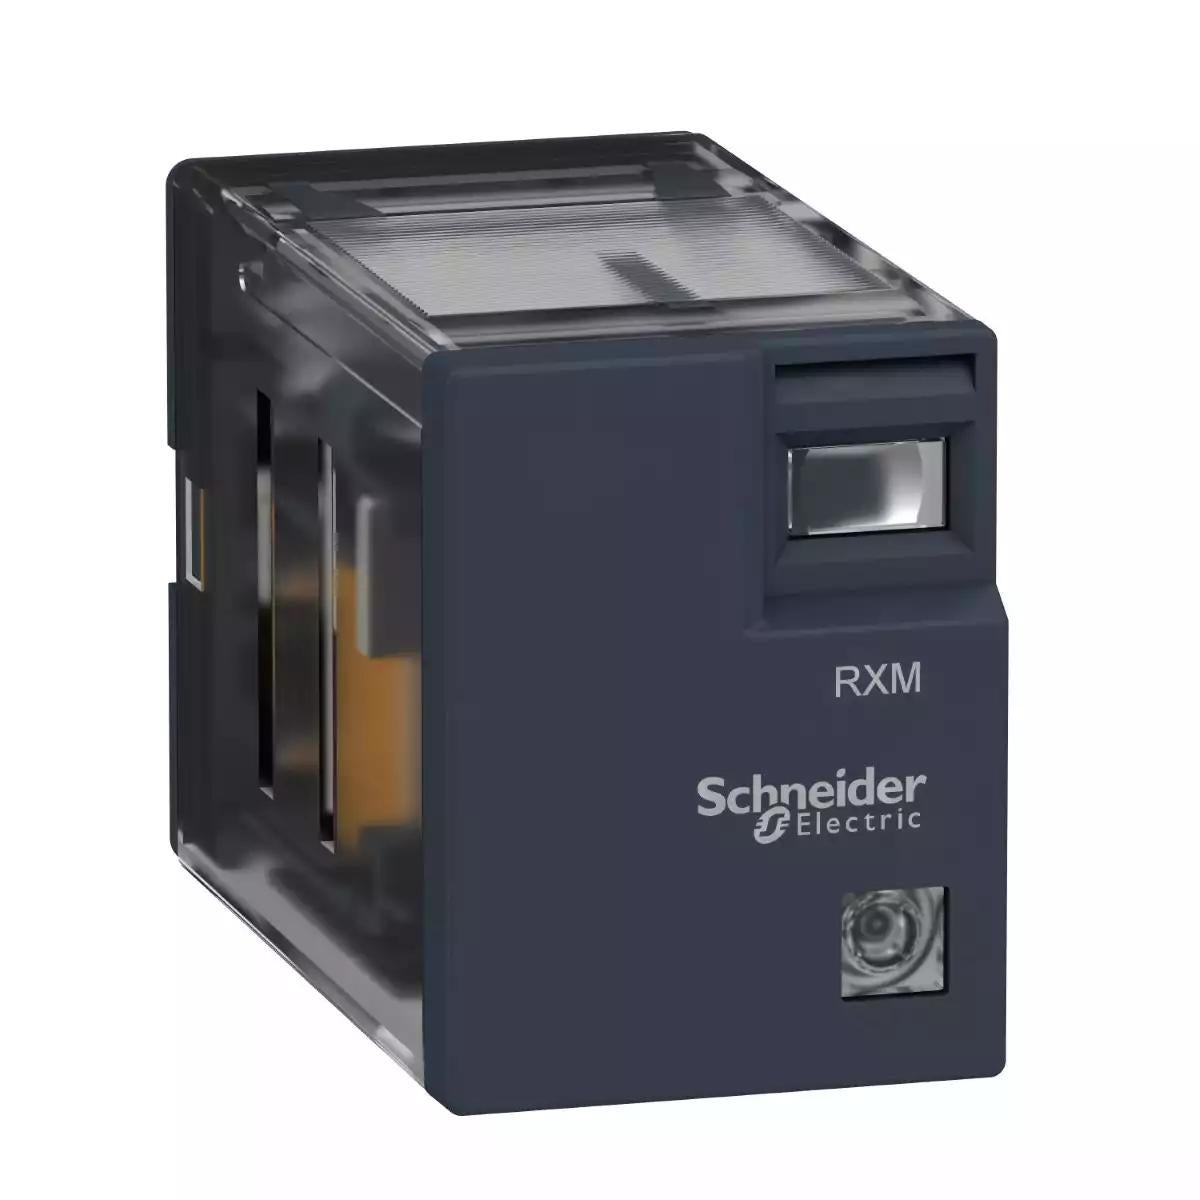 Schneider Electric Zelio RXM - Relay Miniature Plug-in relay2L - 2 C/O - 230 V AC - 5 A - without LED